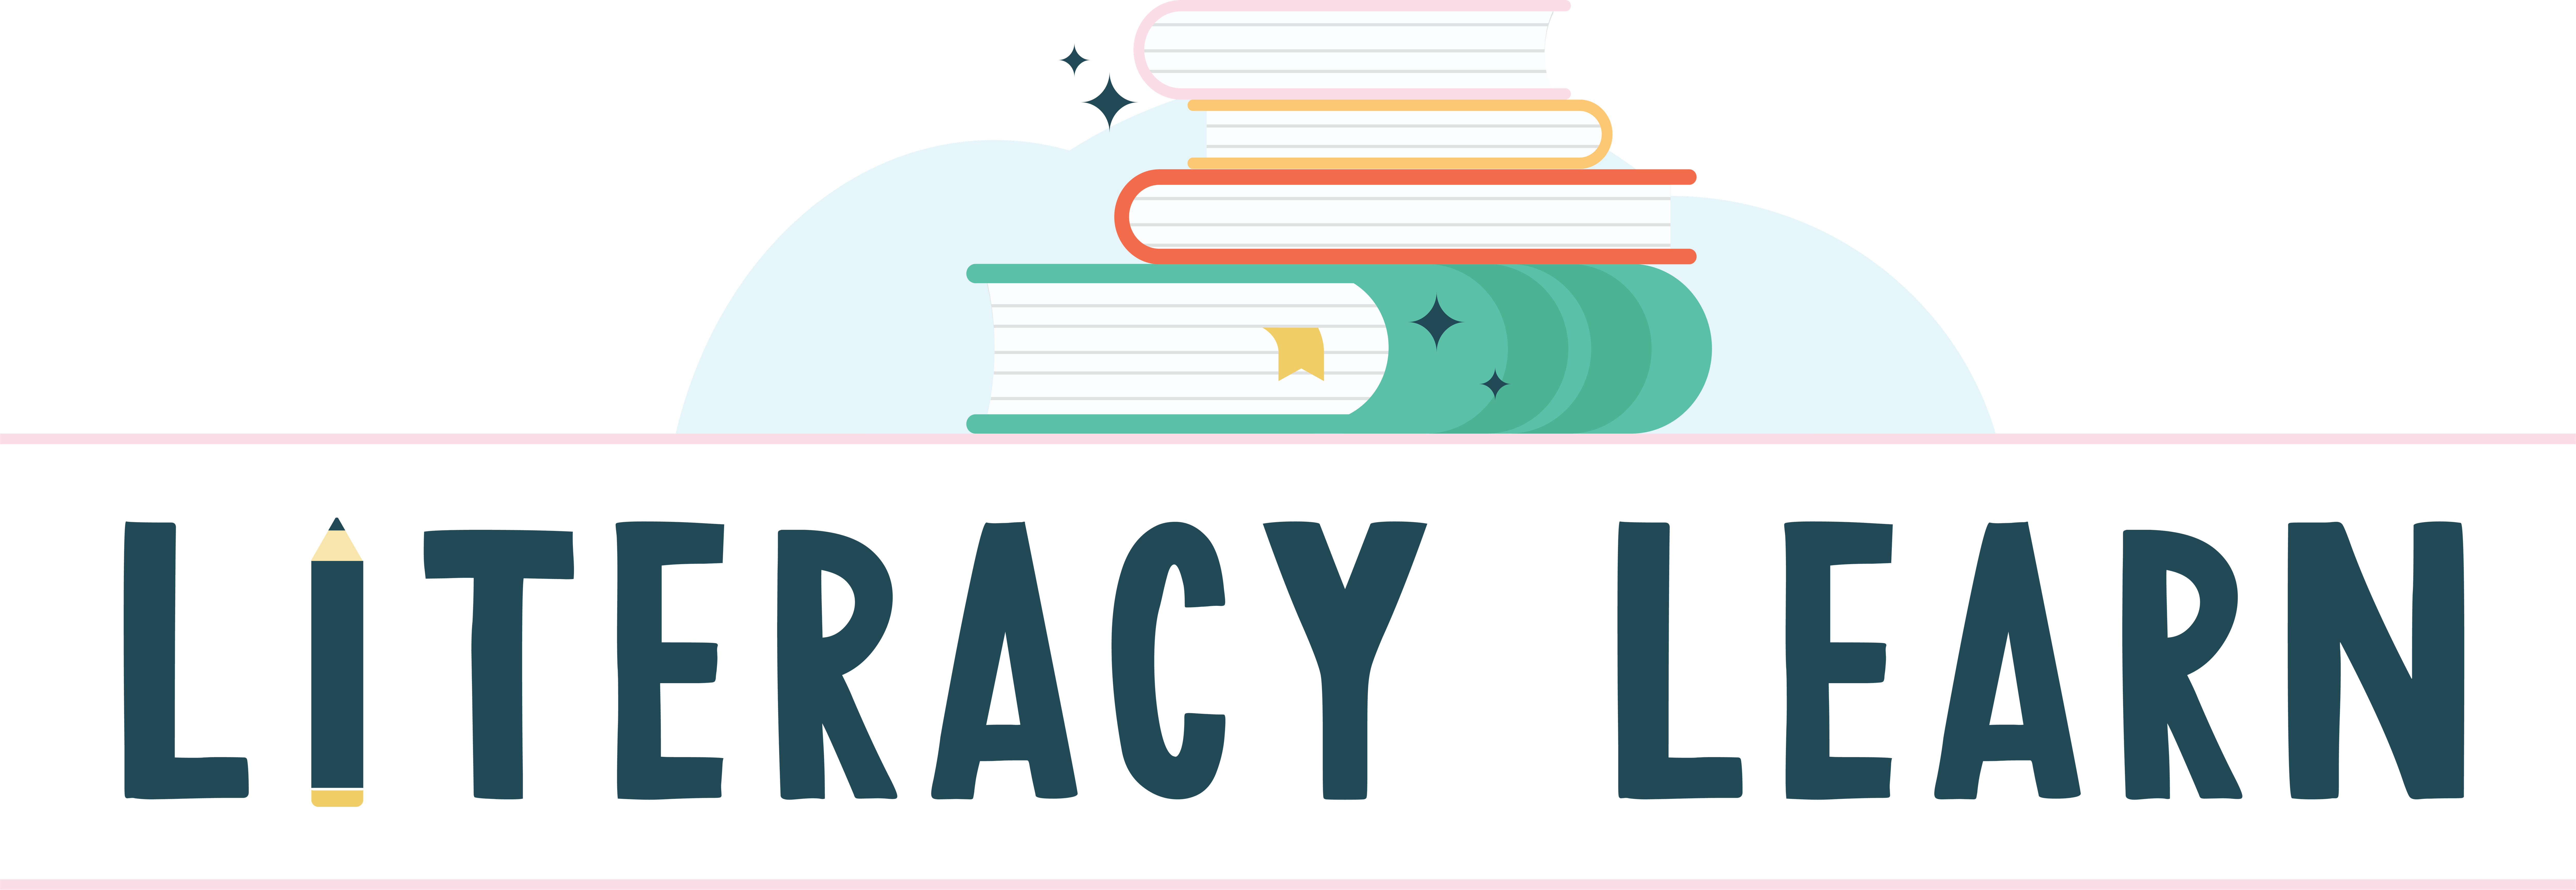 Literacy Learn Logo with a stack of books.